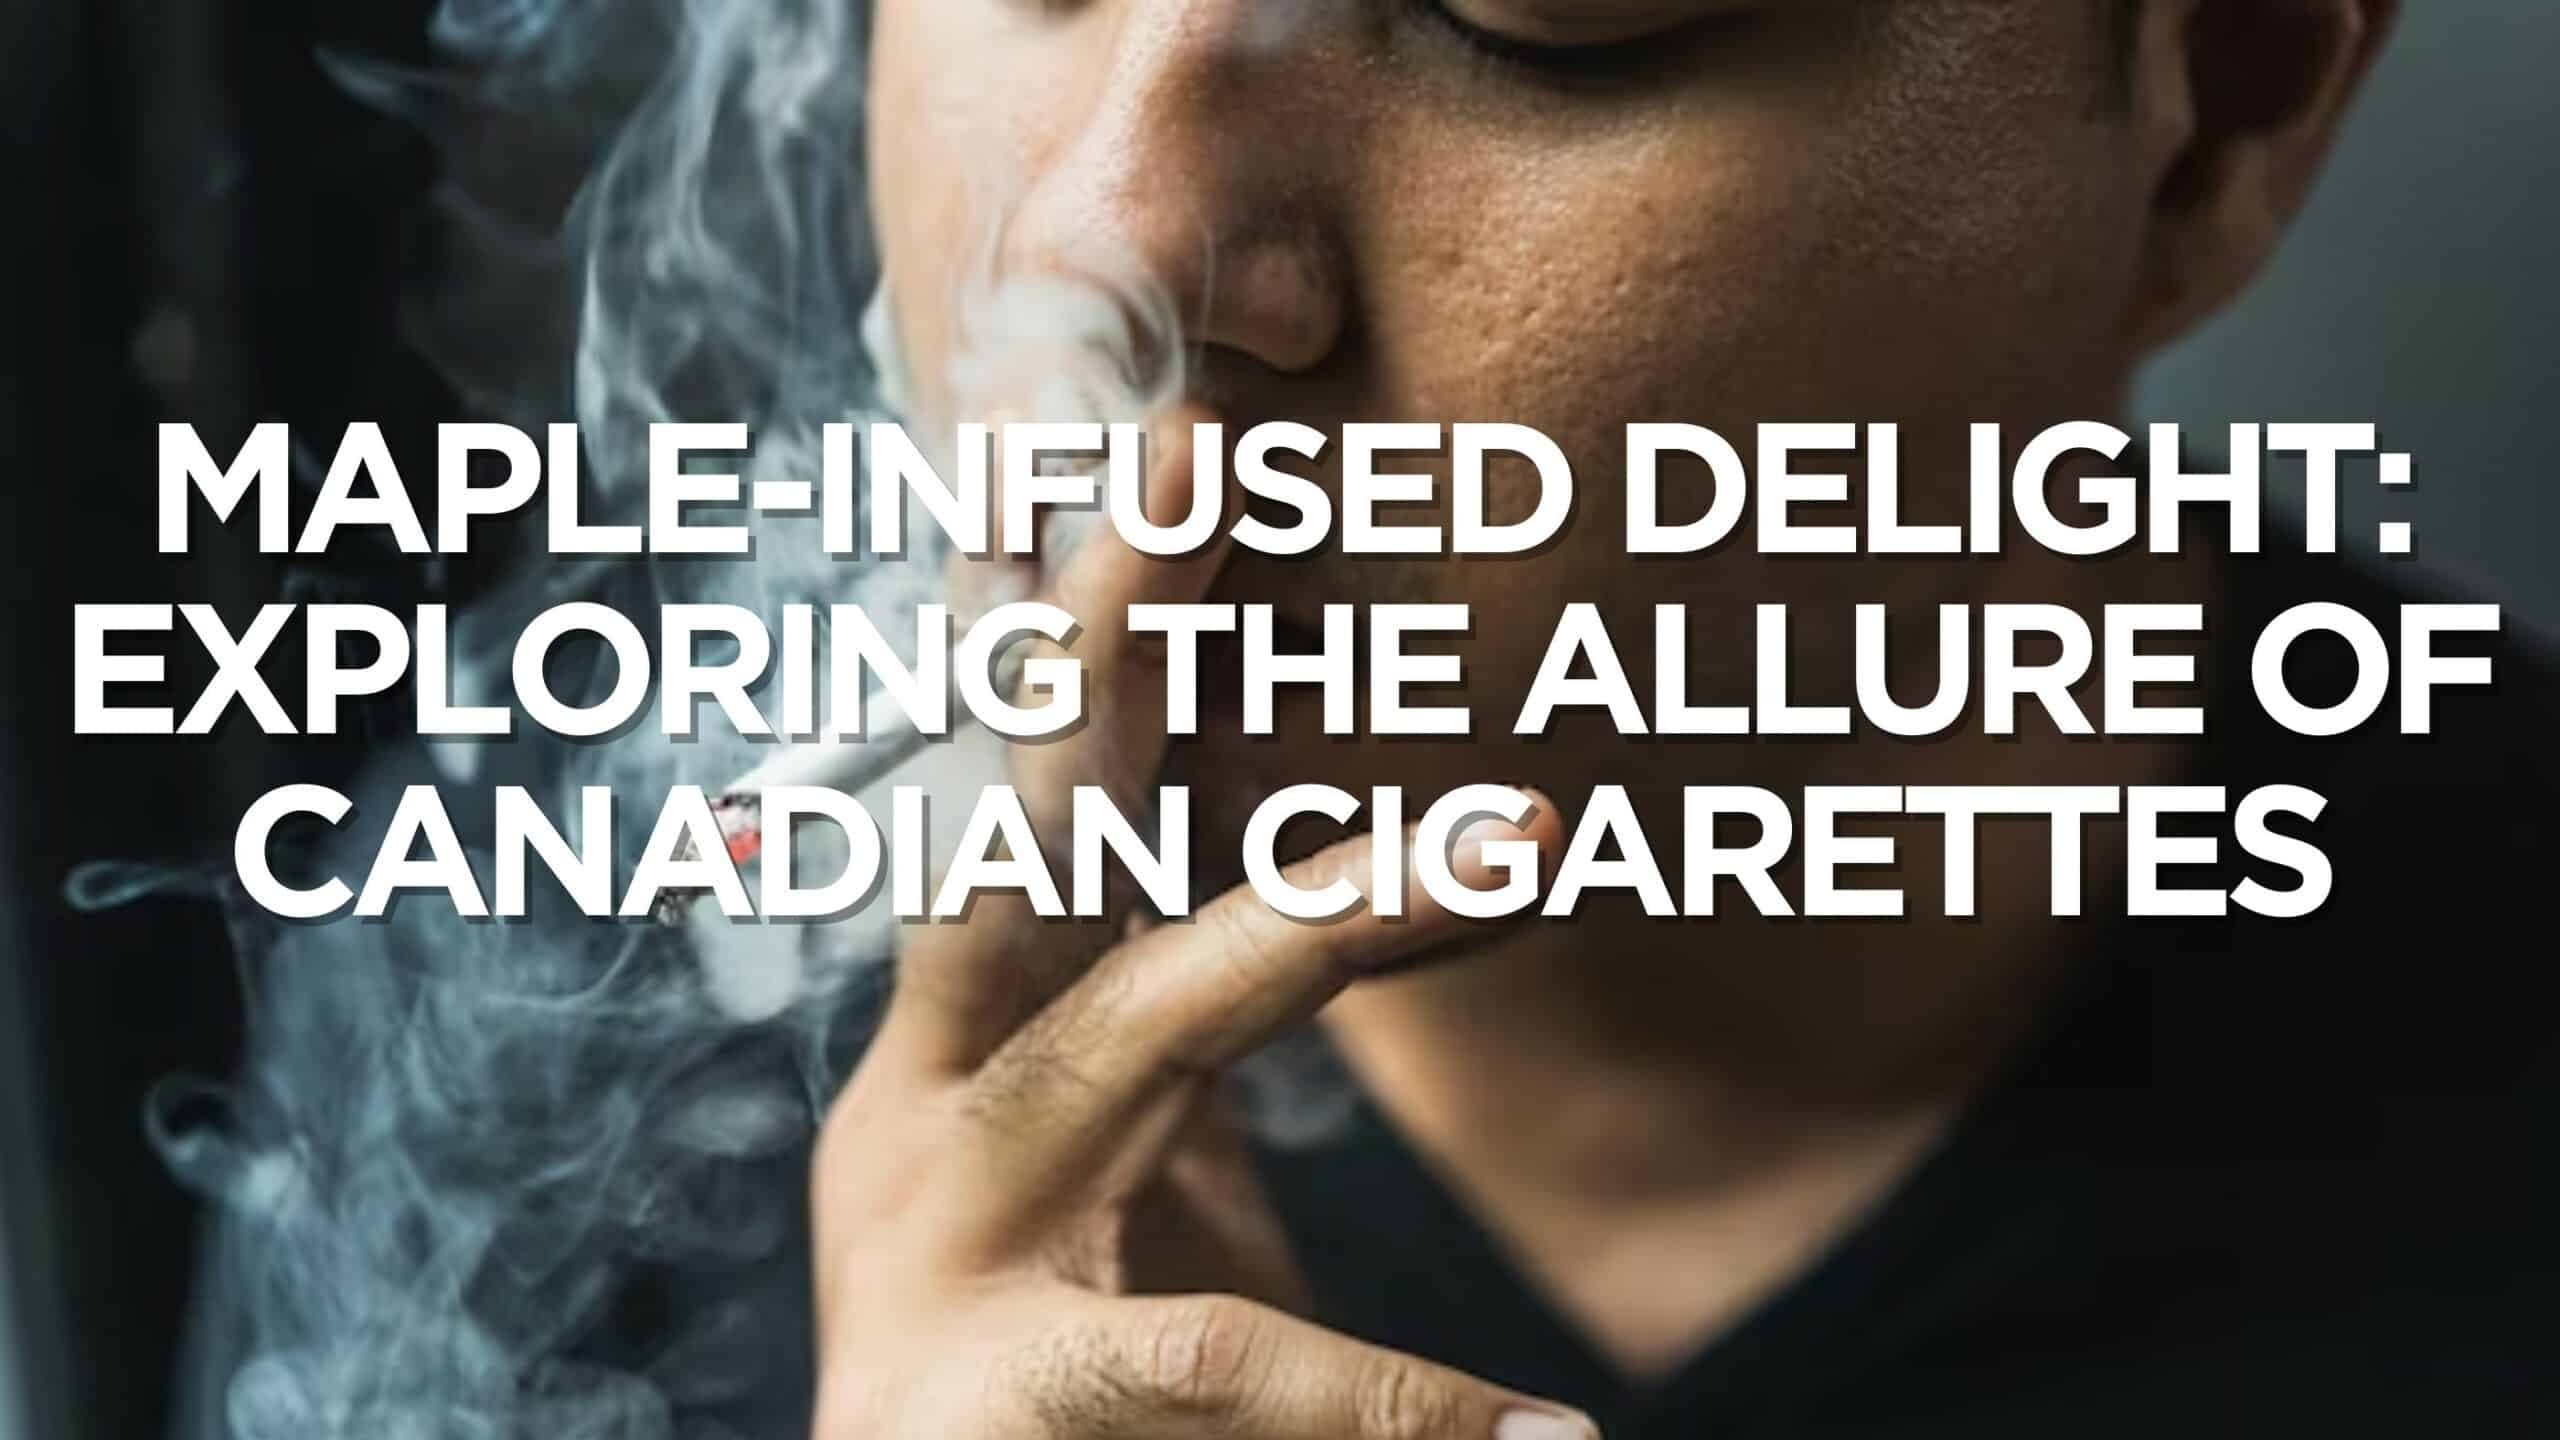 Maple-Infused Delight Exploring the Allure of Canadian Cigarettes